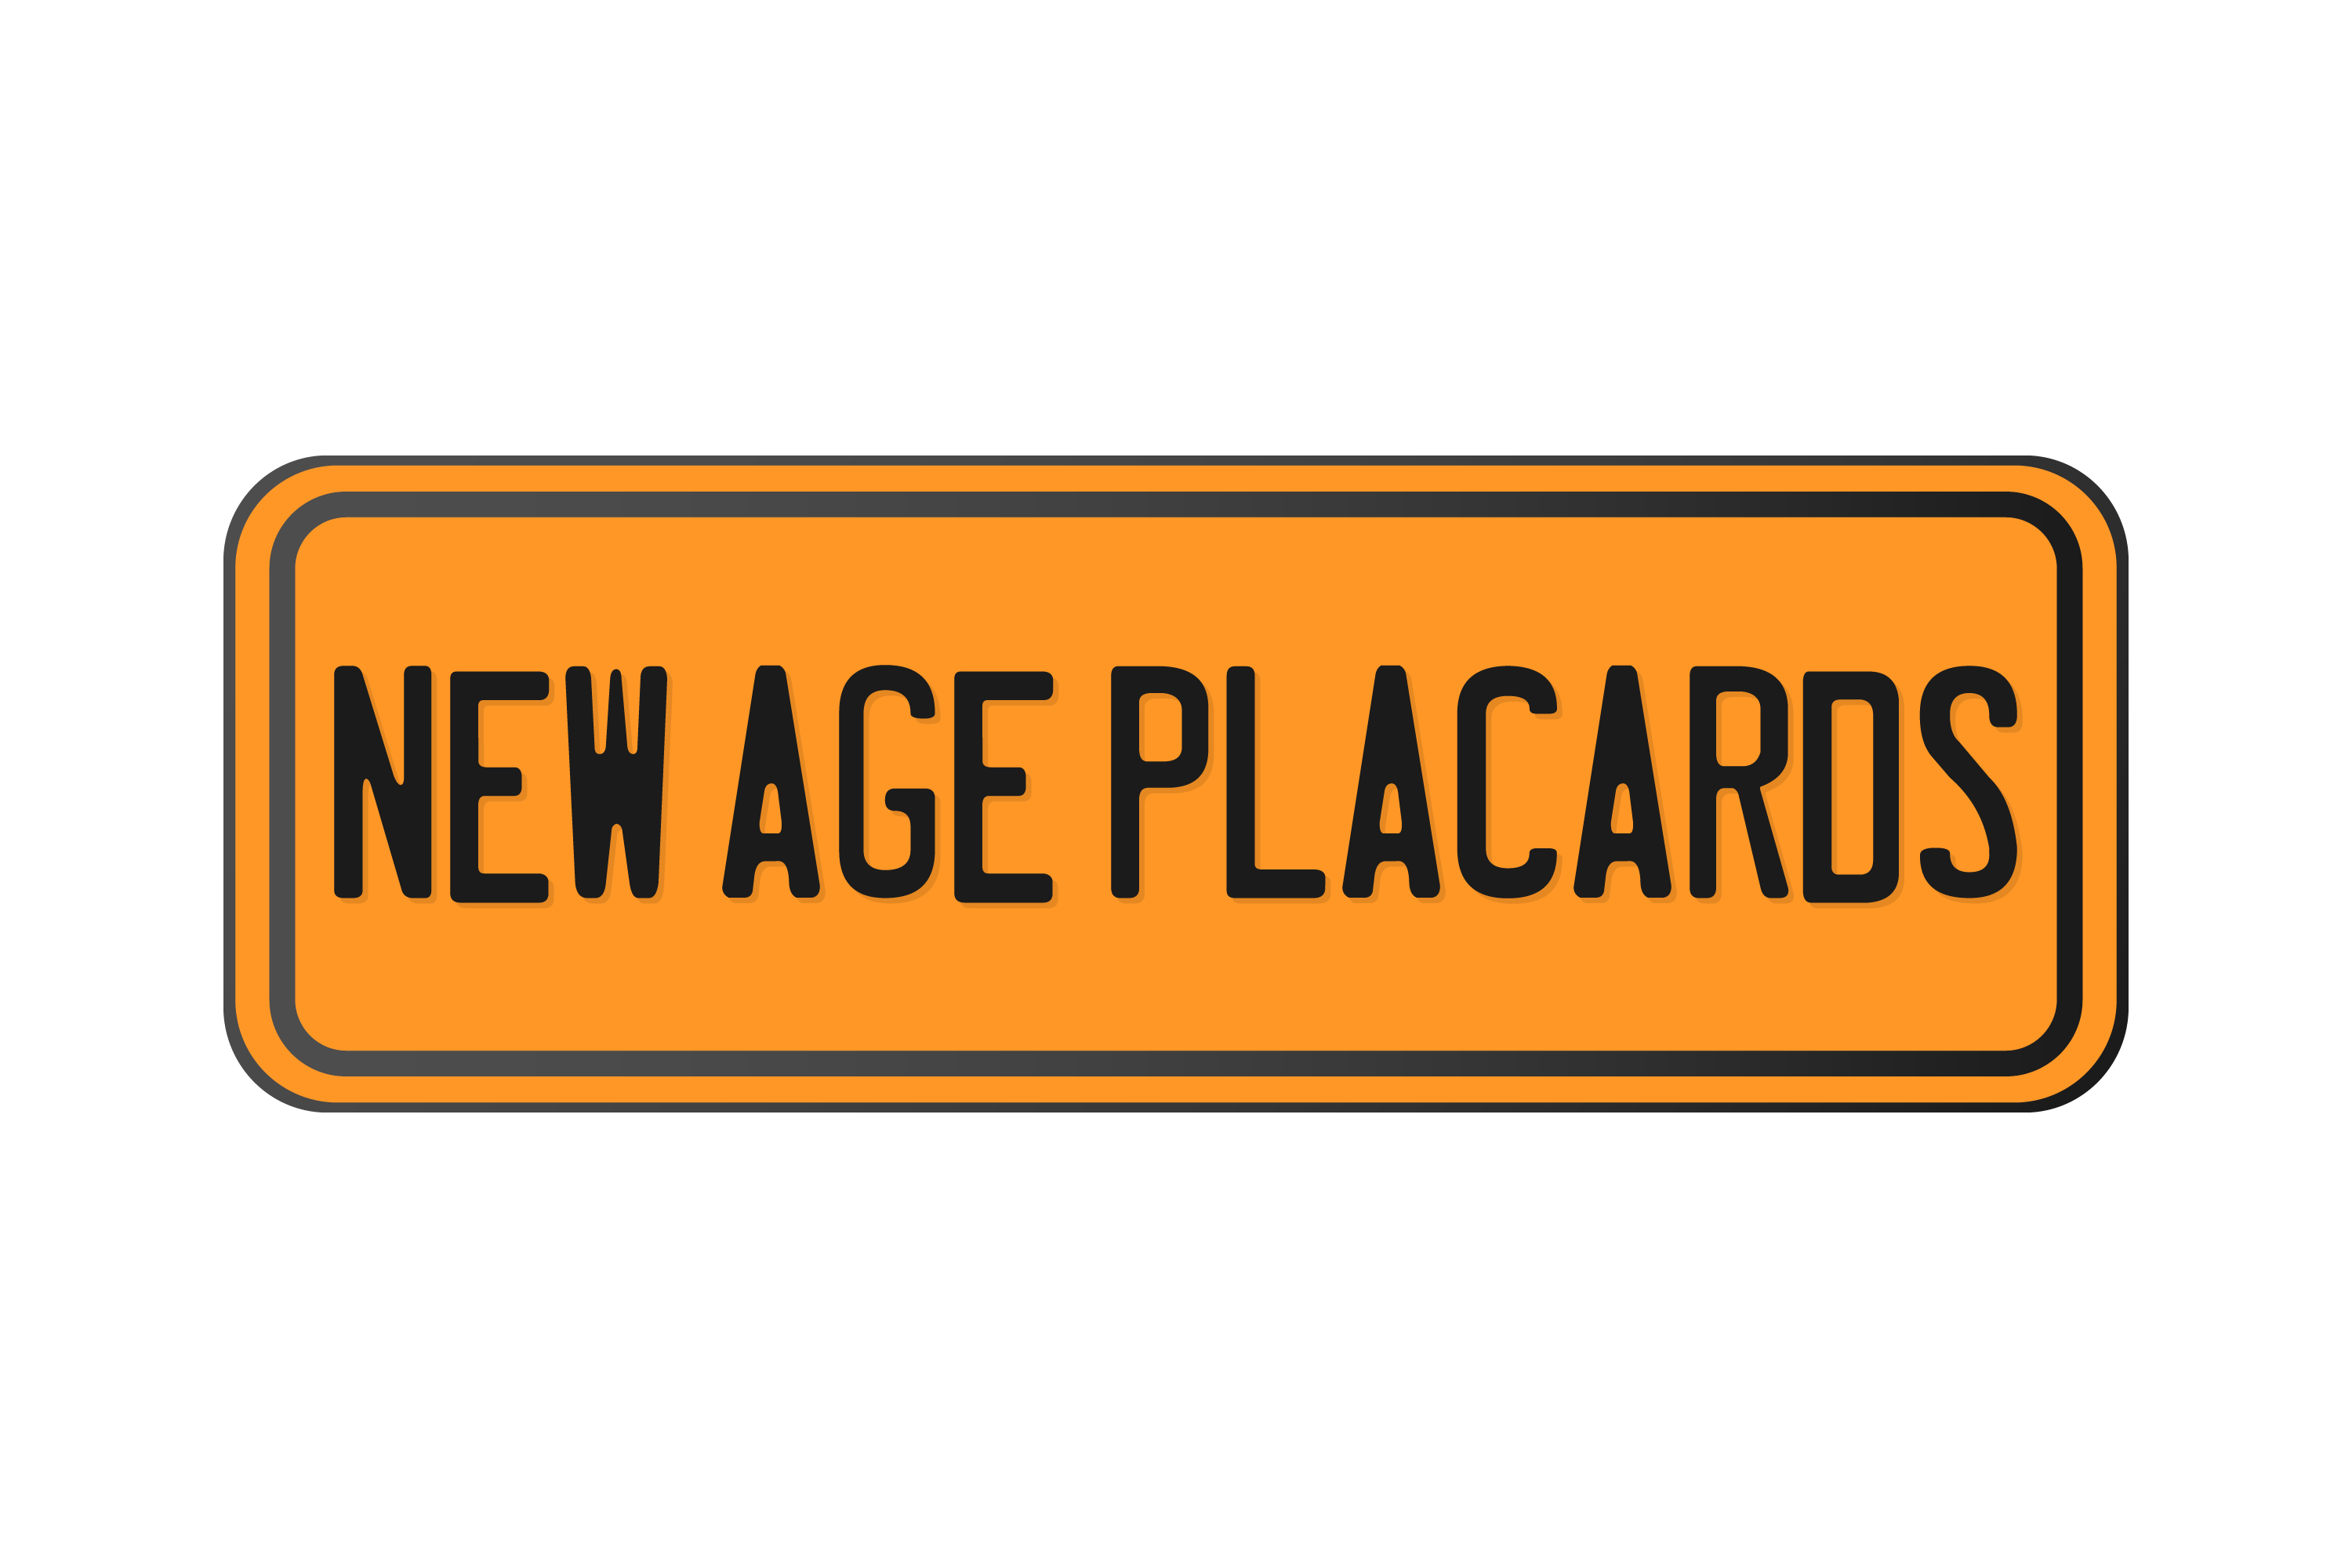 New Age Placards are customizable, digital truck signs that can be used in place of the current signs already on trucks.